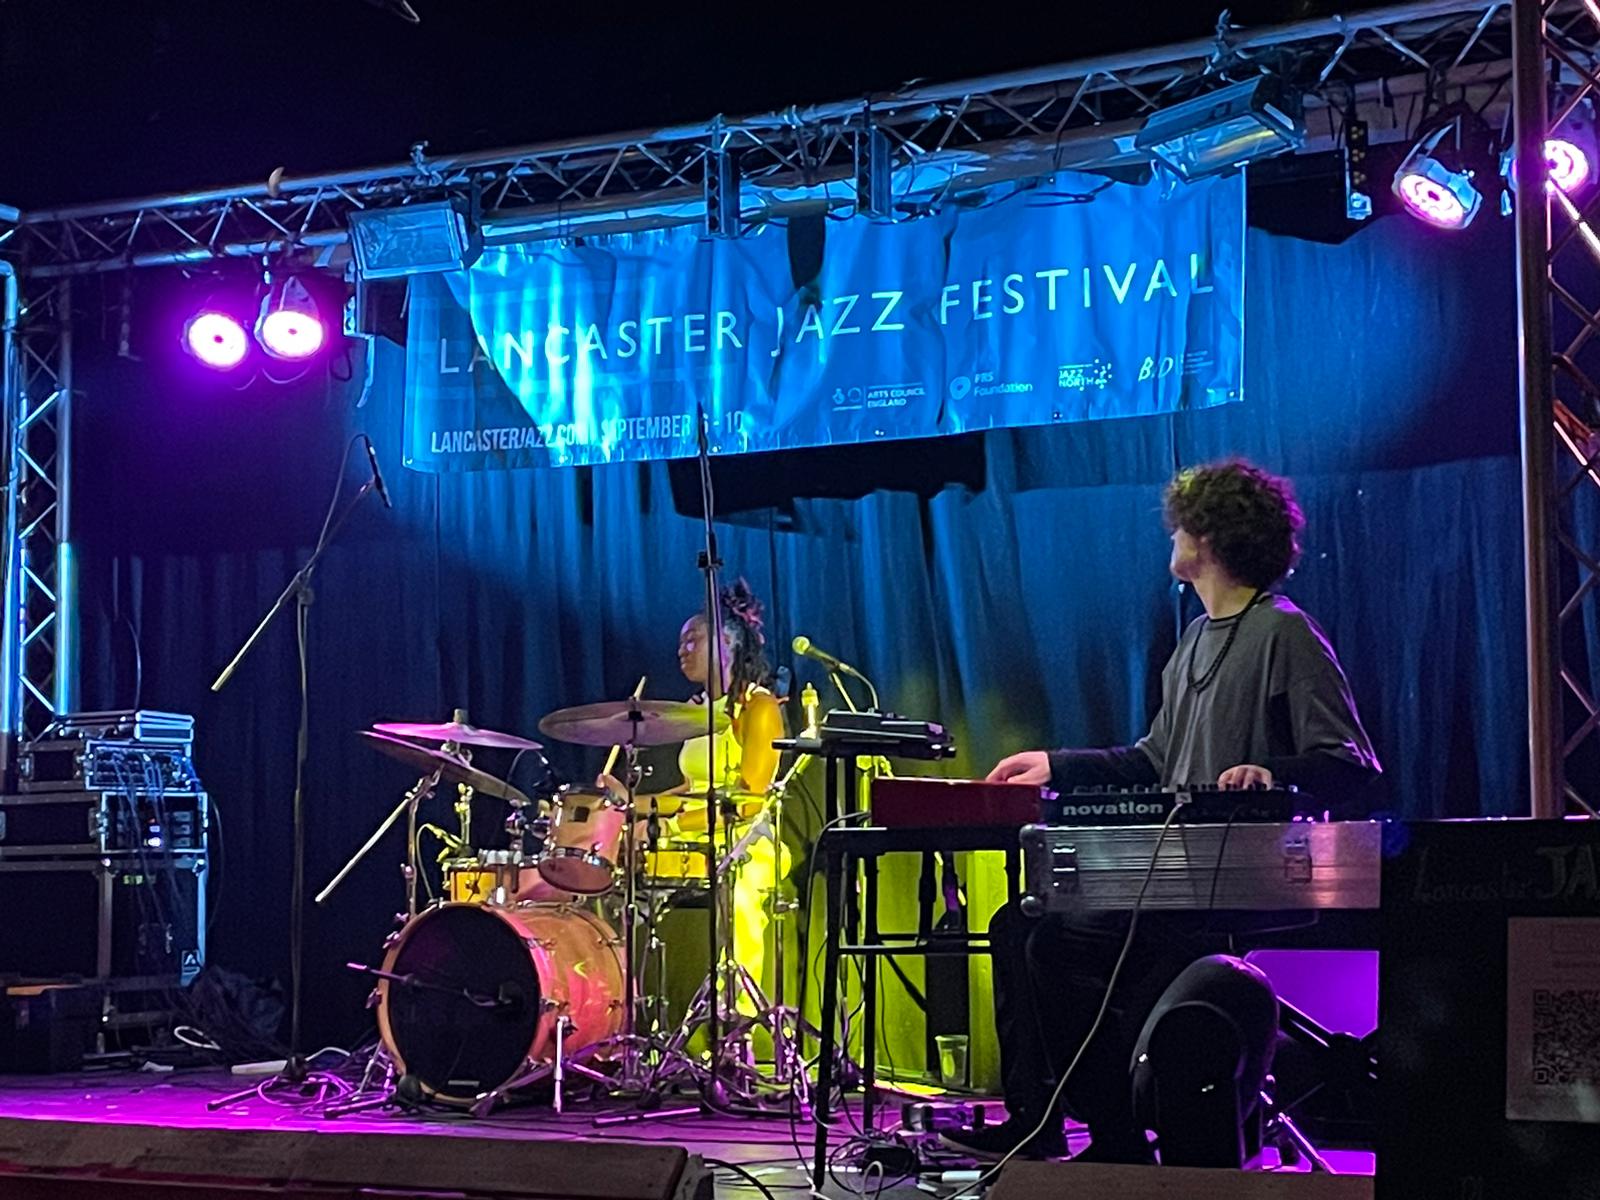 Innovation at its best at the Lancaster Jazz festival